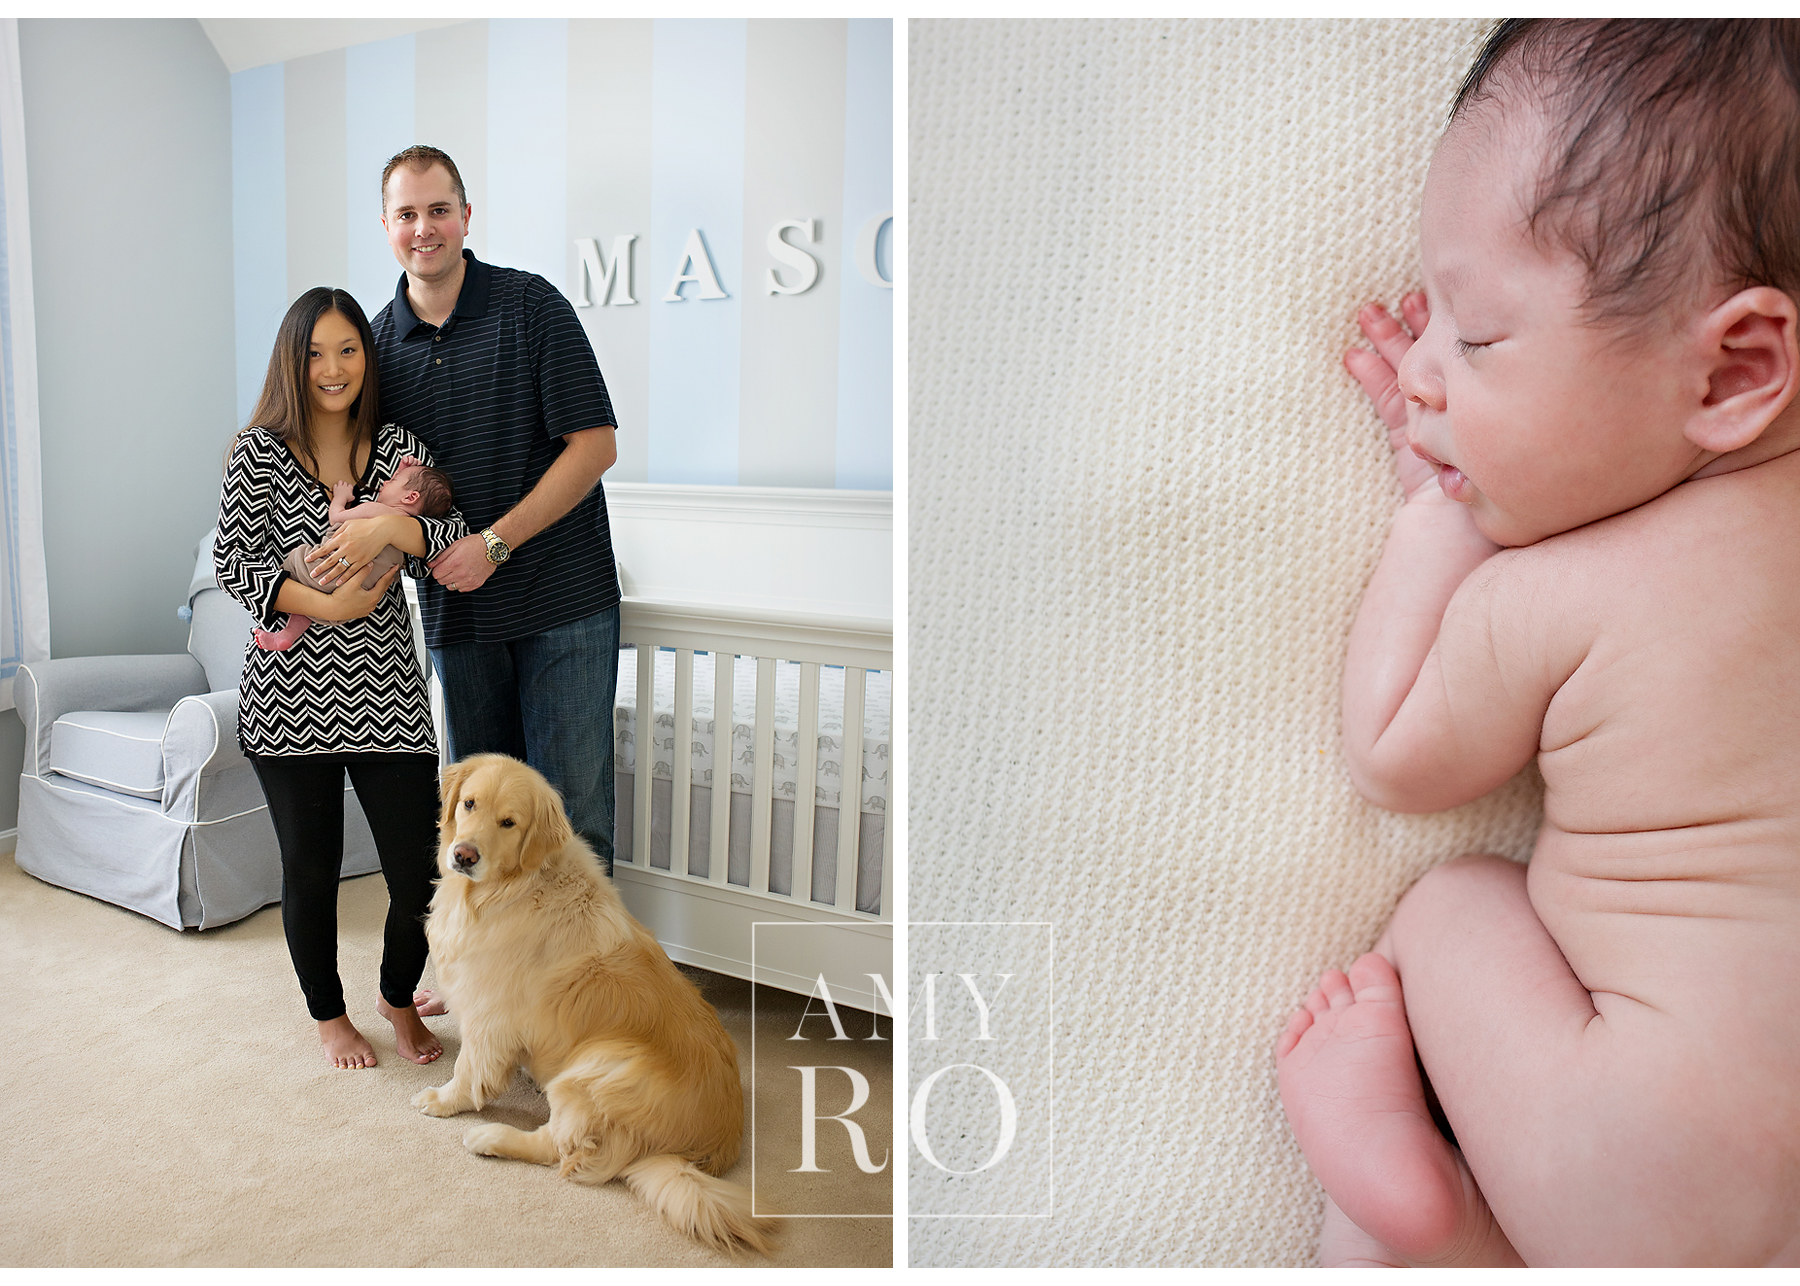 Newborn family image with the family dog golden retriever, image of newborn on his side with srinkles